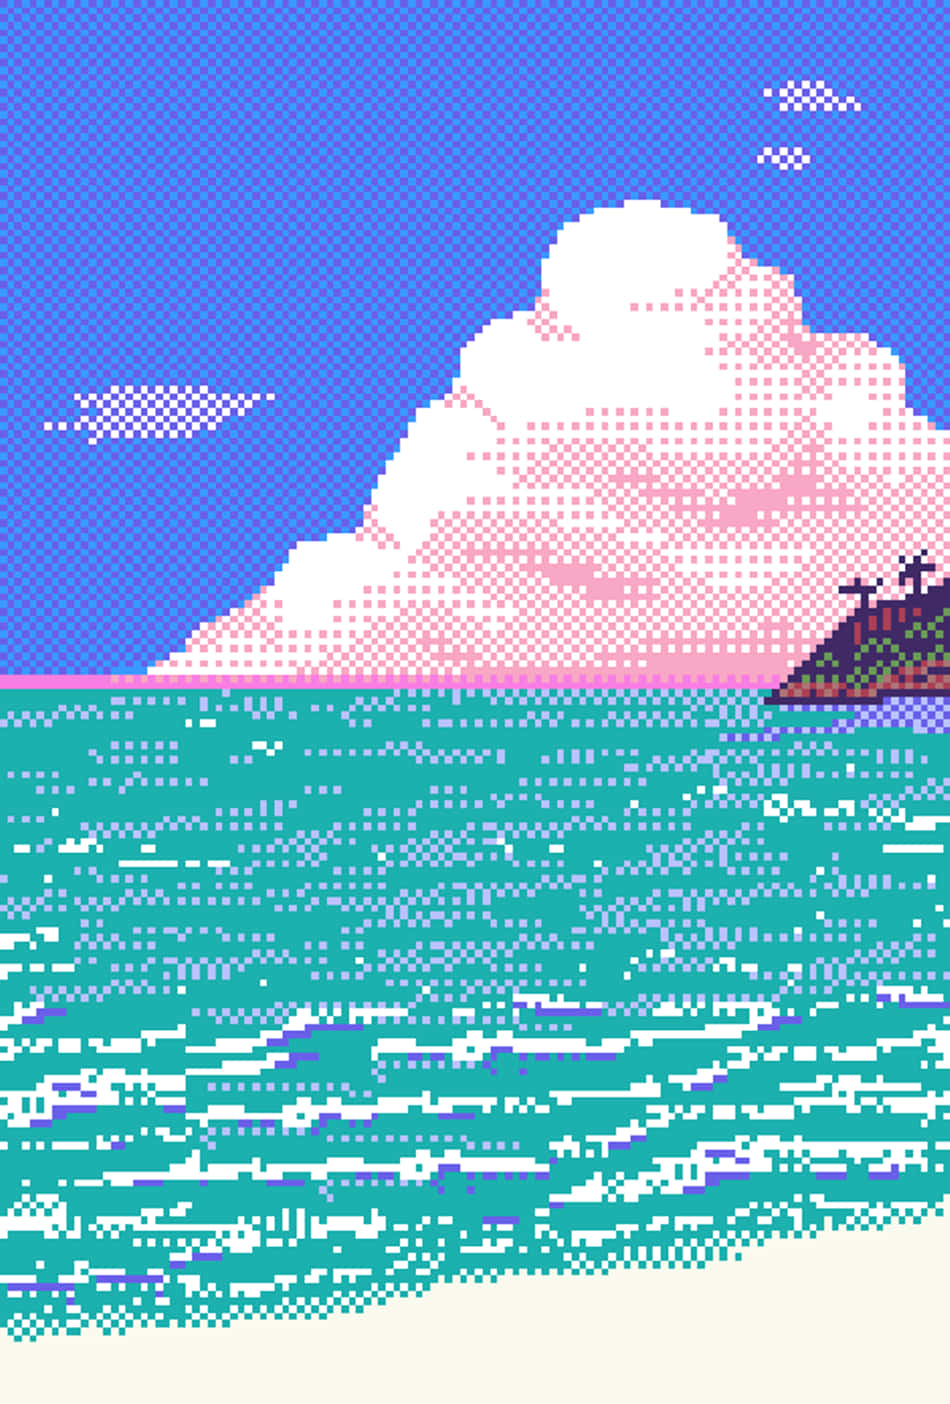 A Pixelated Image Of A Beach With A Cloud Background